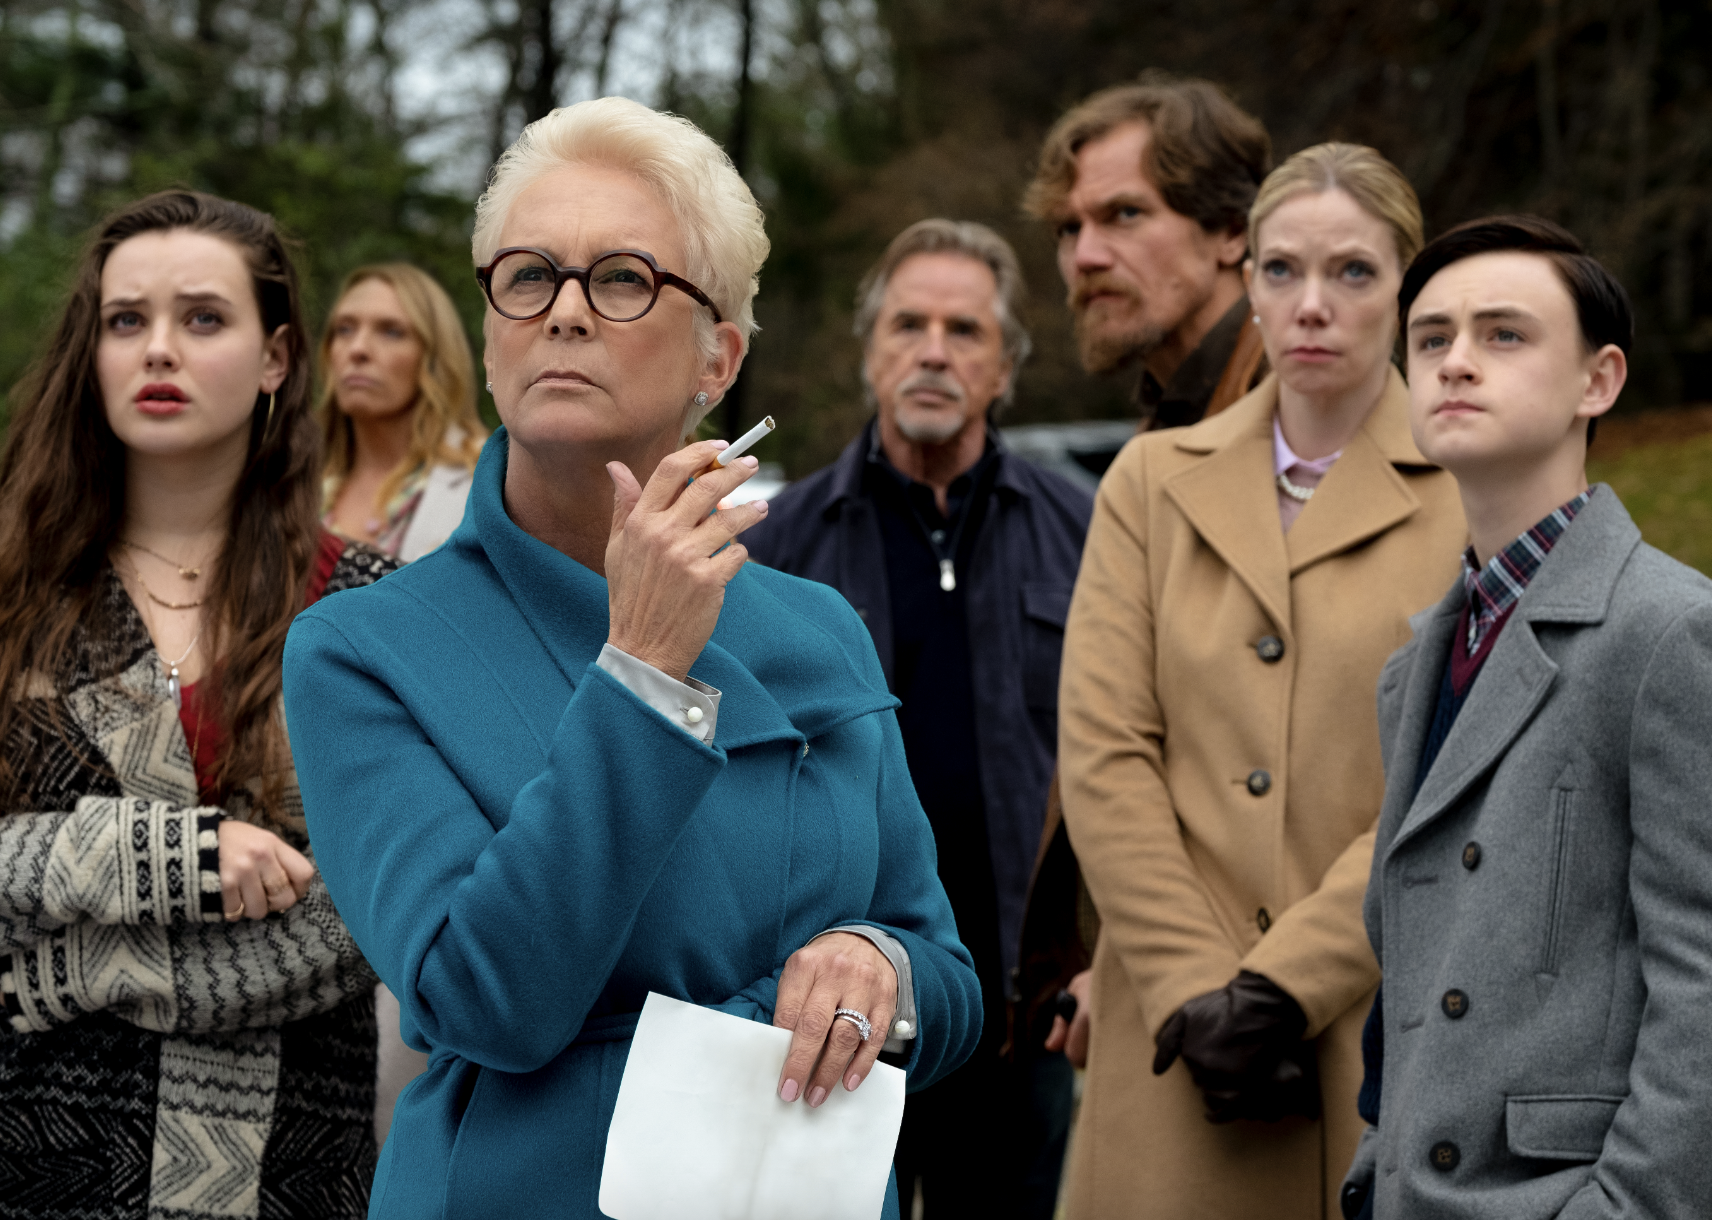 Jamie Lee Curtis, Don Johnson, Toni Collette, Michael Shannon, Riki Lindhome, Jaeden Martell, and Katherine Langford in "Knives Out"